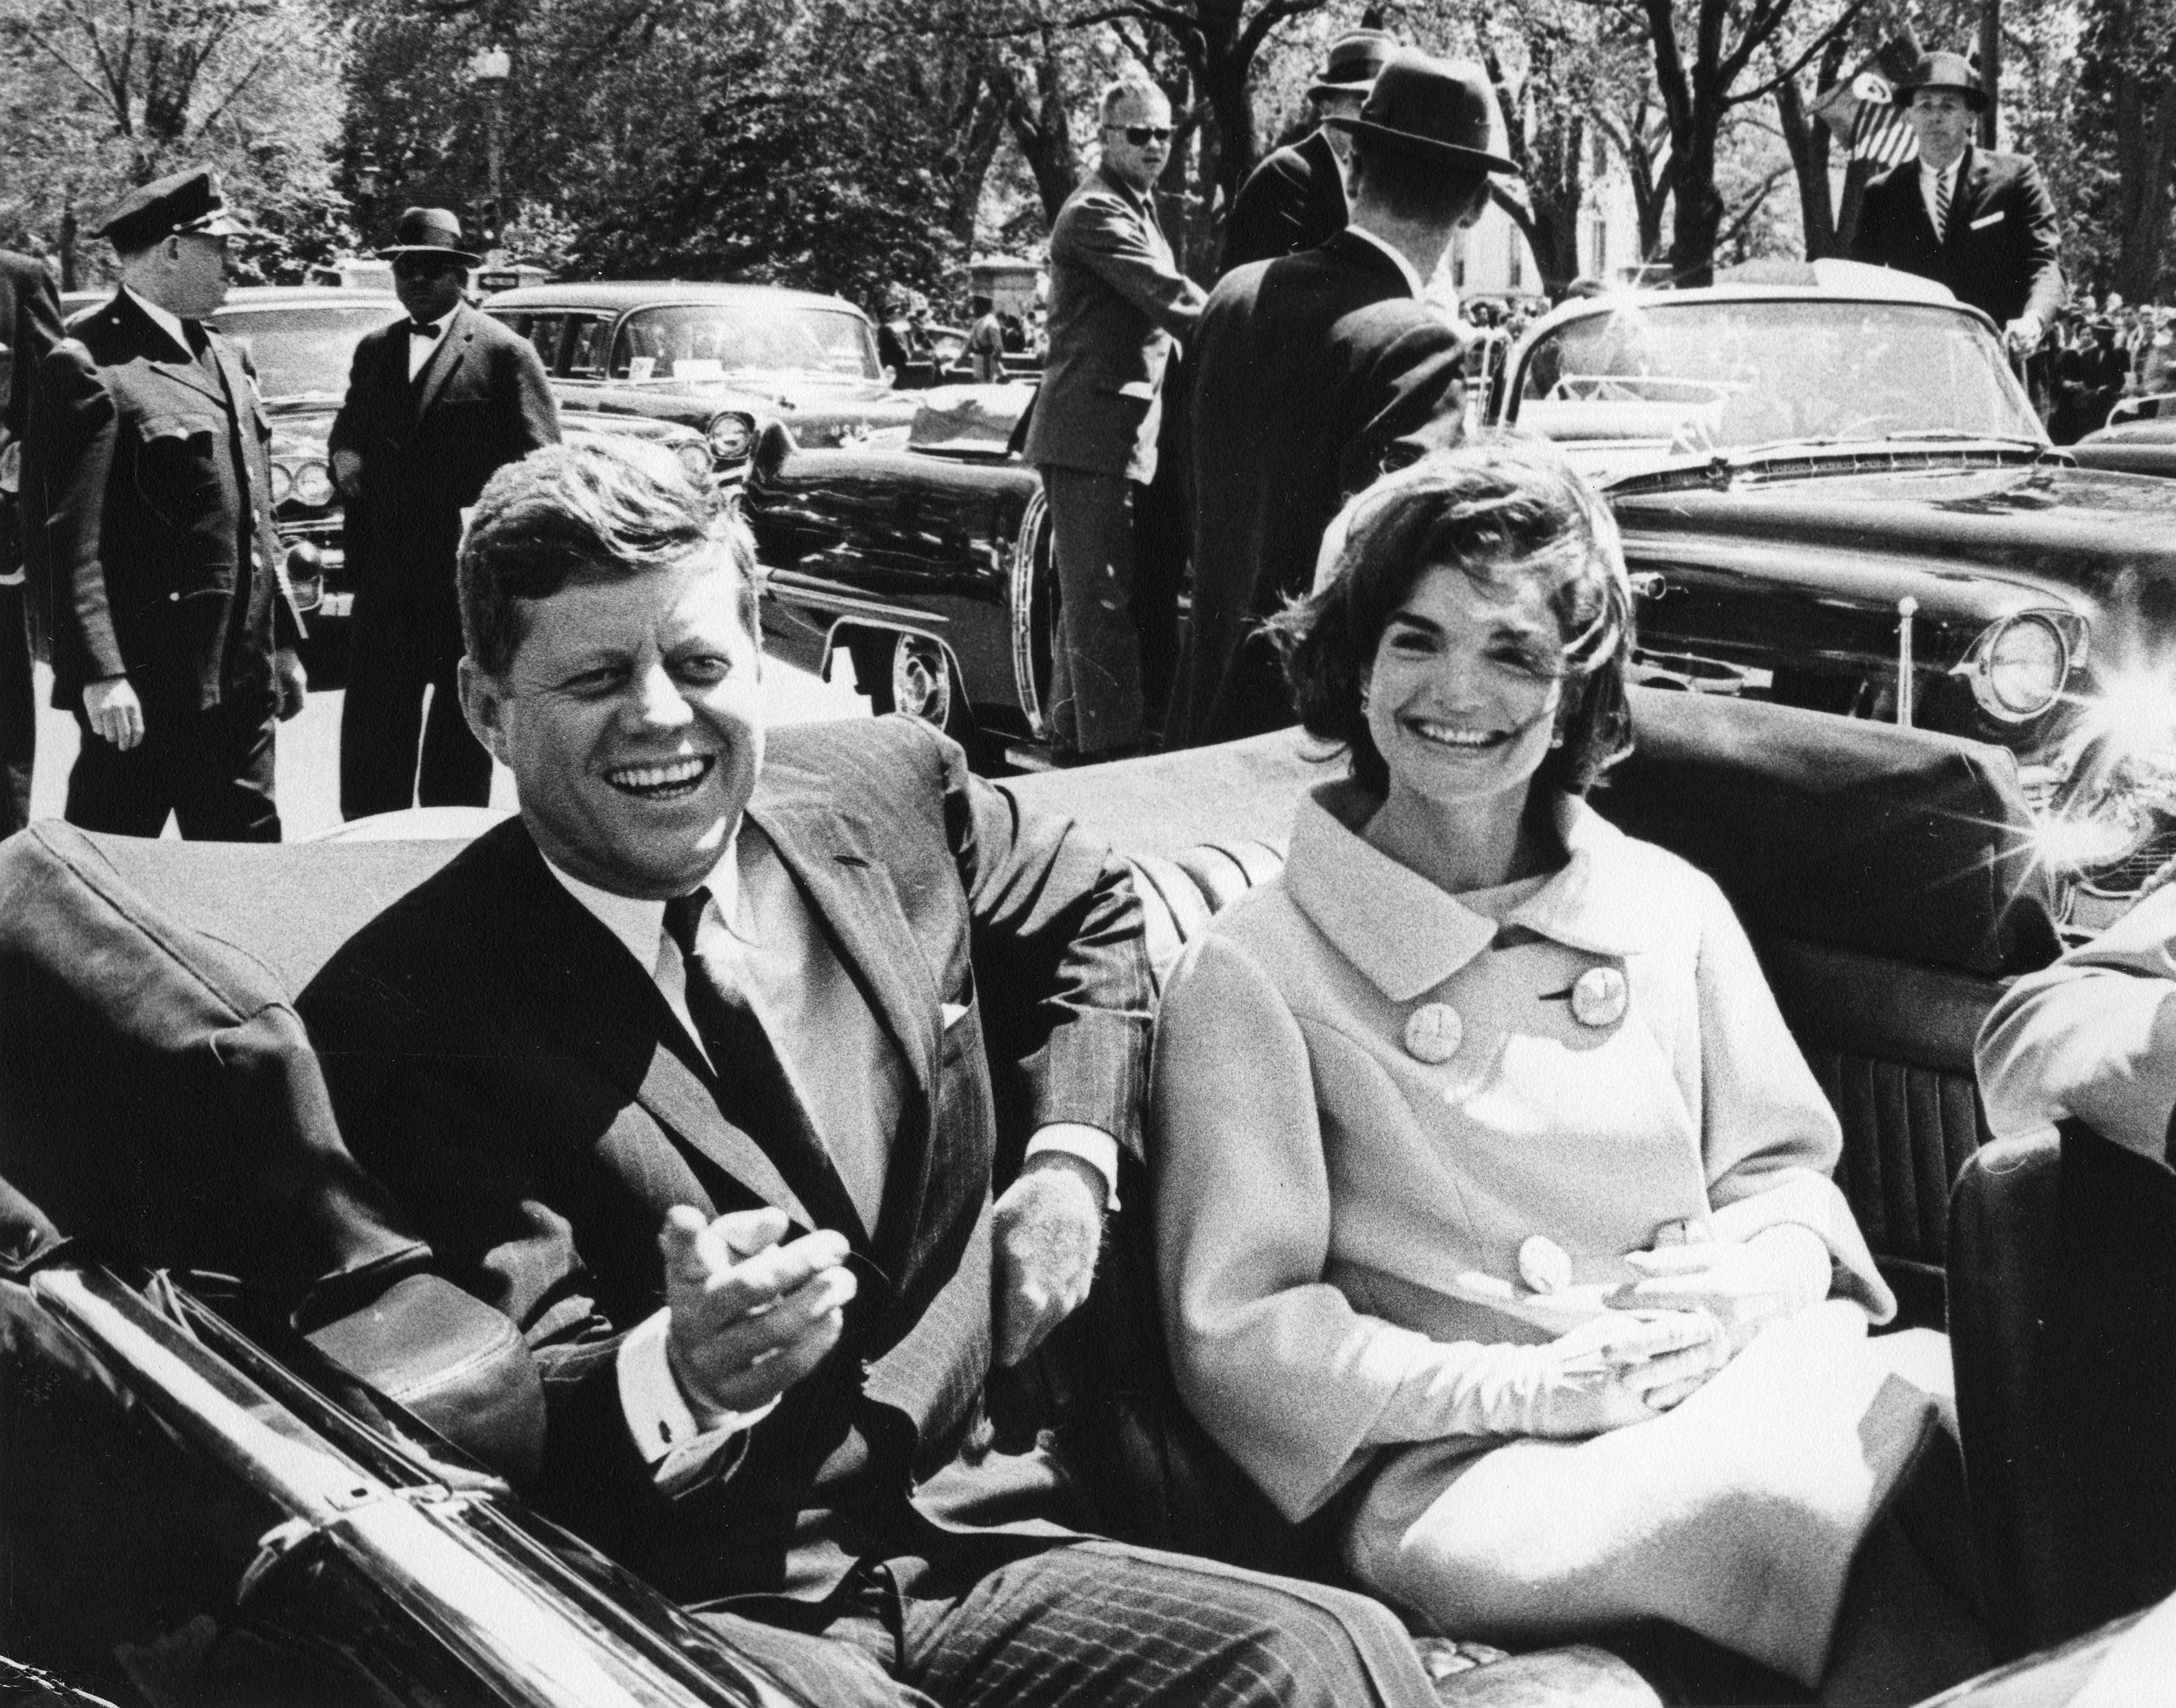 Former United States President John F. Kennedy and first lady Jackie Kennedy sit in a car in front of Blair House during the arrival ceremonies for Habib Bourguiba, president of Tunisia, in Washington, in this handout image taken on May 3, 1961. November 22, 2013 will mark the 50th anniversary of the assassination of President Kennedy. REUTERS/Abbie Rowe/The White House/John F. Kennedy Presidential Library (UNITED STATES - Tags: POLITICS ANNIVERSARY)    ATTENTION EDITORS - THIS IMAGE WAS PROVIDED BY A THIRD PARTY. FOR EDITORIAL USE ONLY. NOT FOR SALE FOR MARKETING OR ADVERTISING CAMPAIGNS. THIS PICTURE IS DISTRIBUTED EXACTLY AS RECEIVED BY REUTERS, AS A SERVICE TO CLIENTS